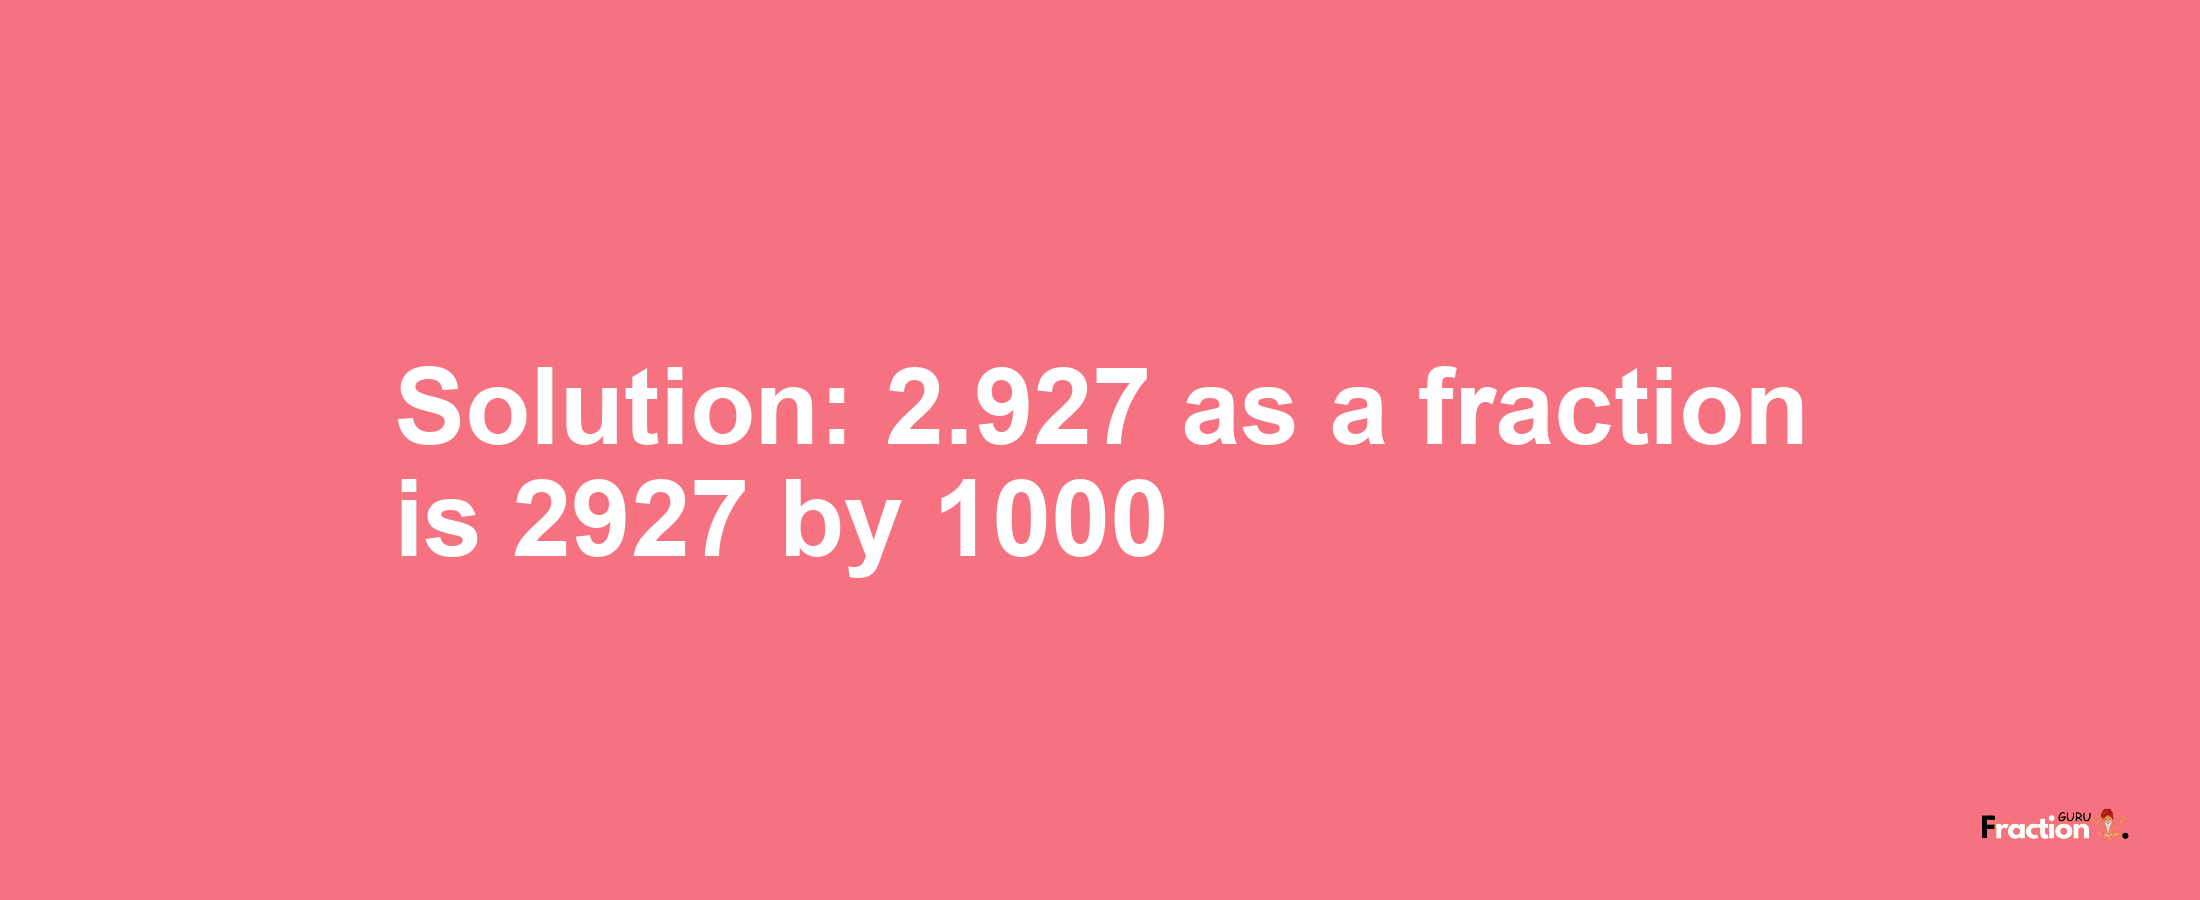 Solution:2.927 as a fraction is 2927/1000